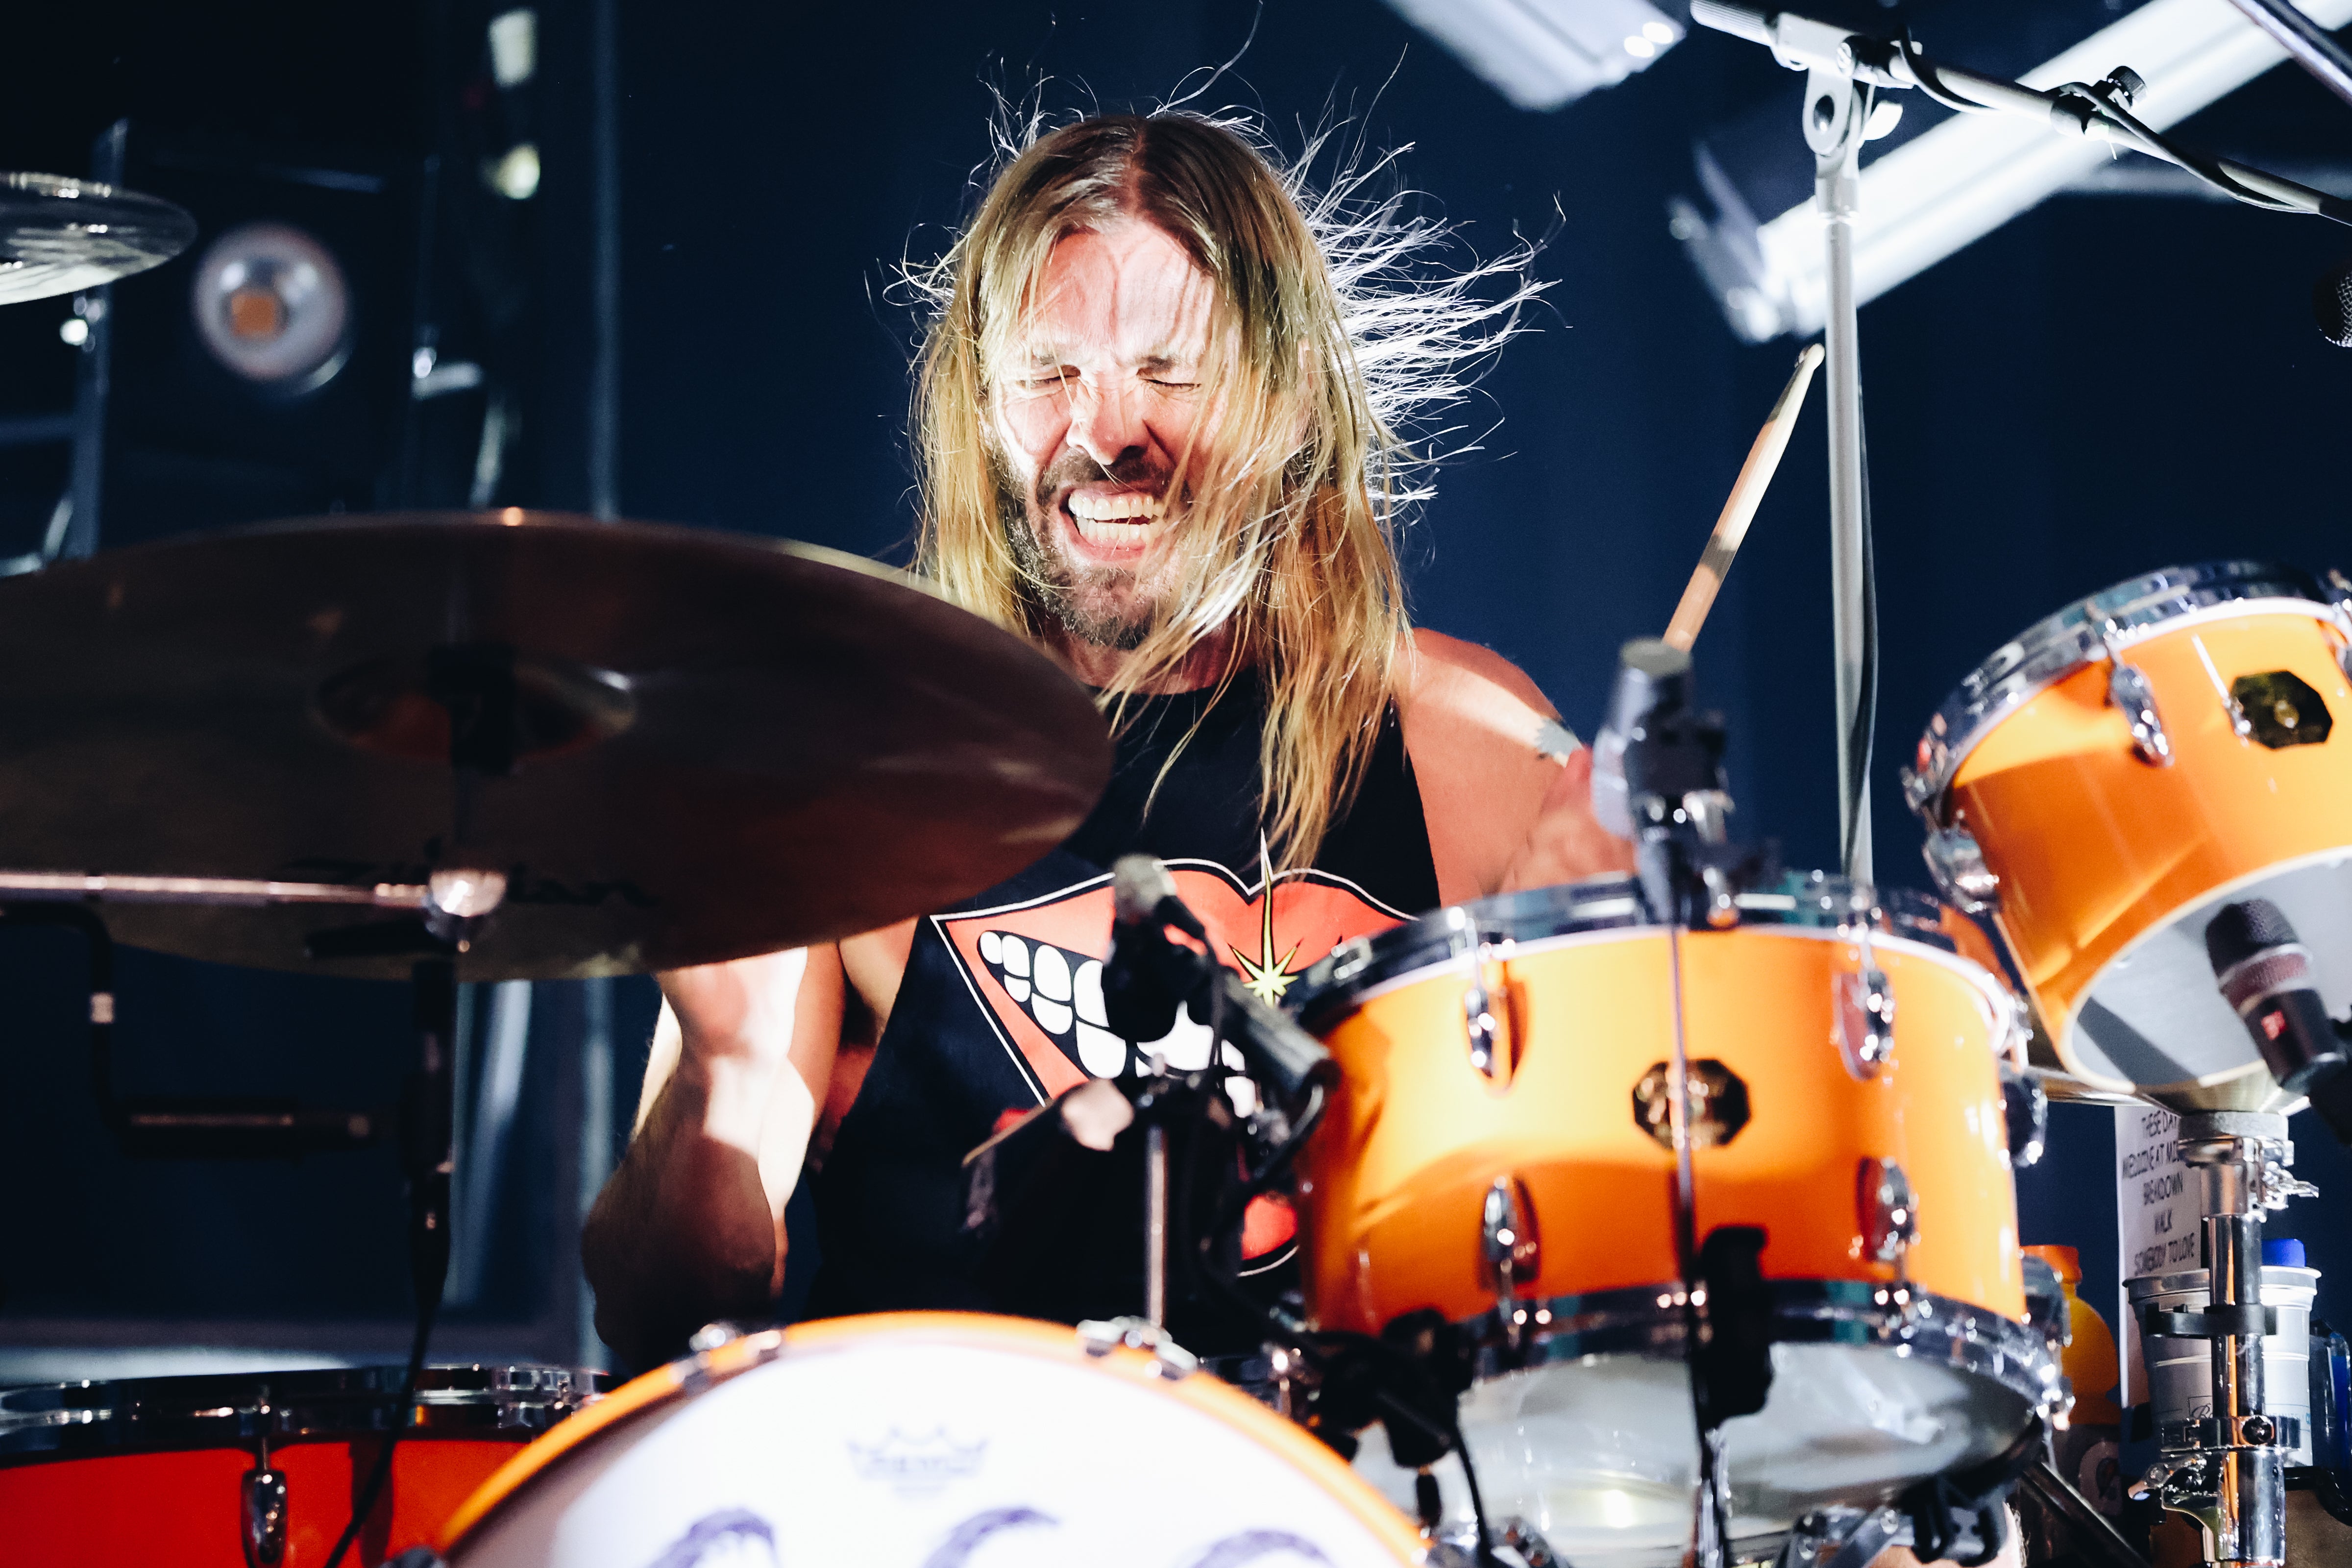 Drummer Taylor Hawkins, died on 25 March 2022, during Foo Fighters’ South American tour